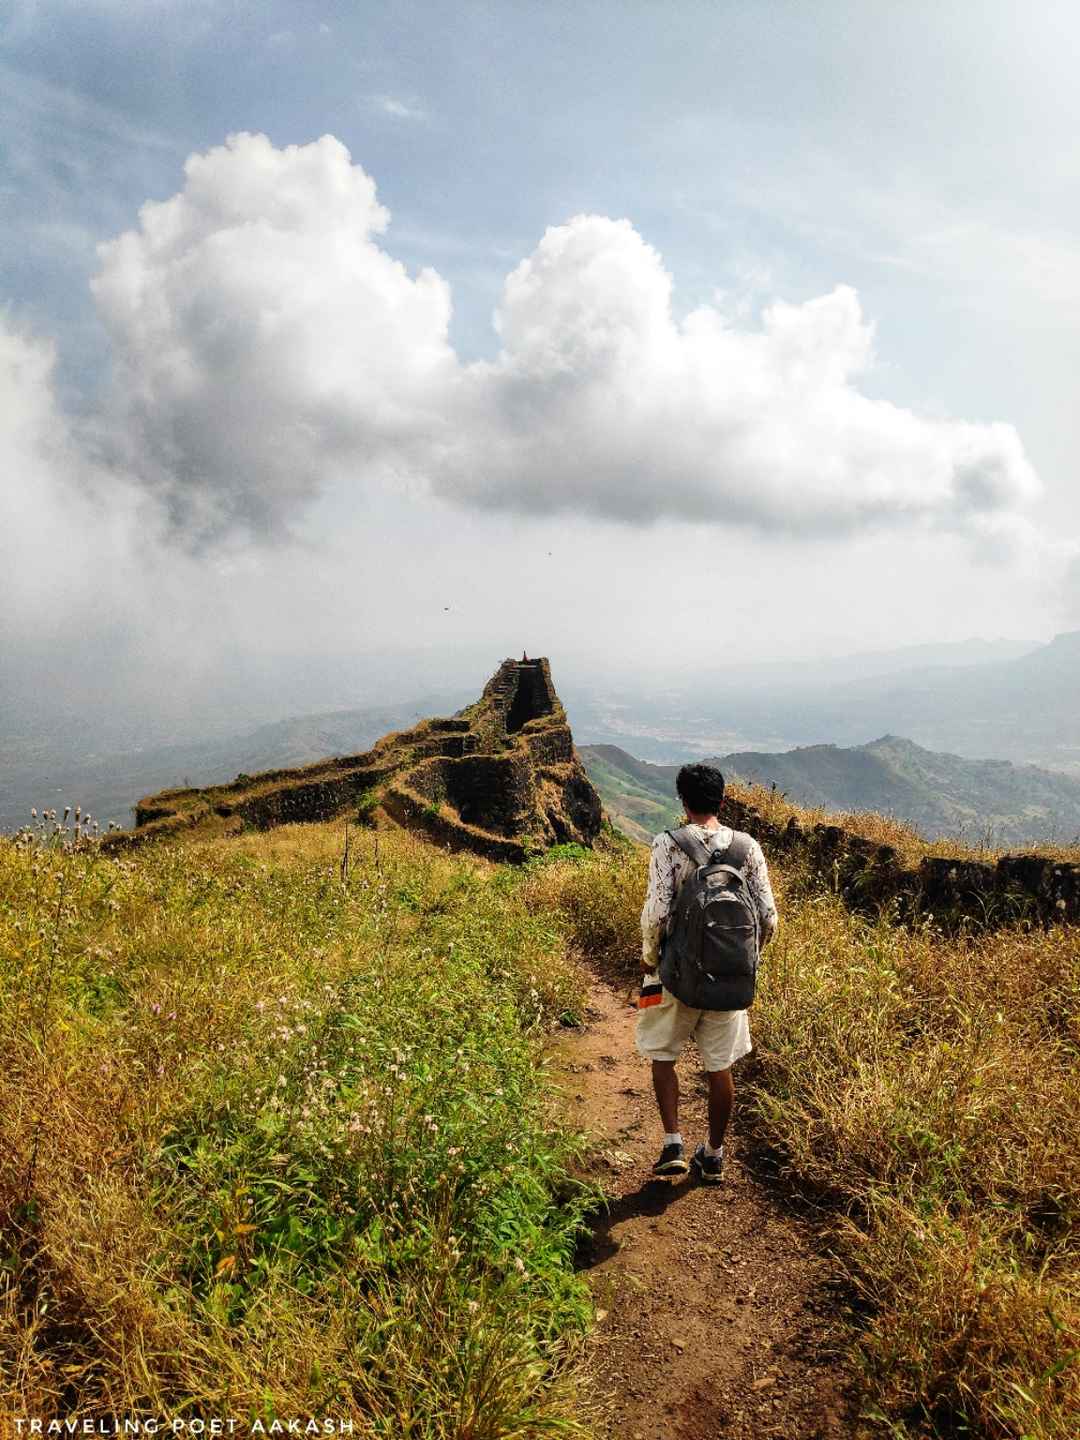 Torna Fort Trek from Pune | Treks and Trails India